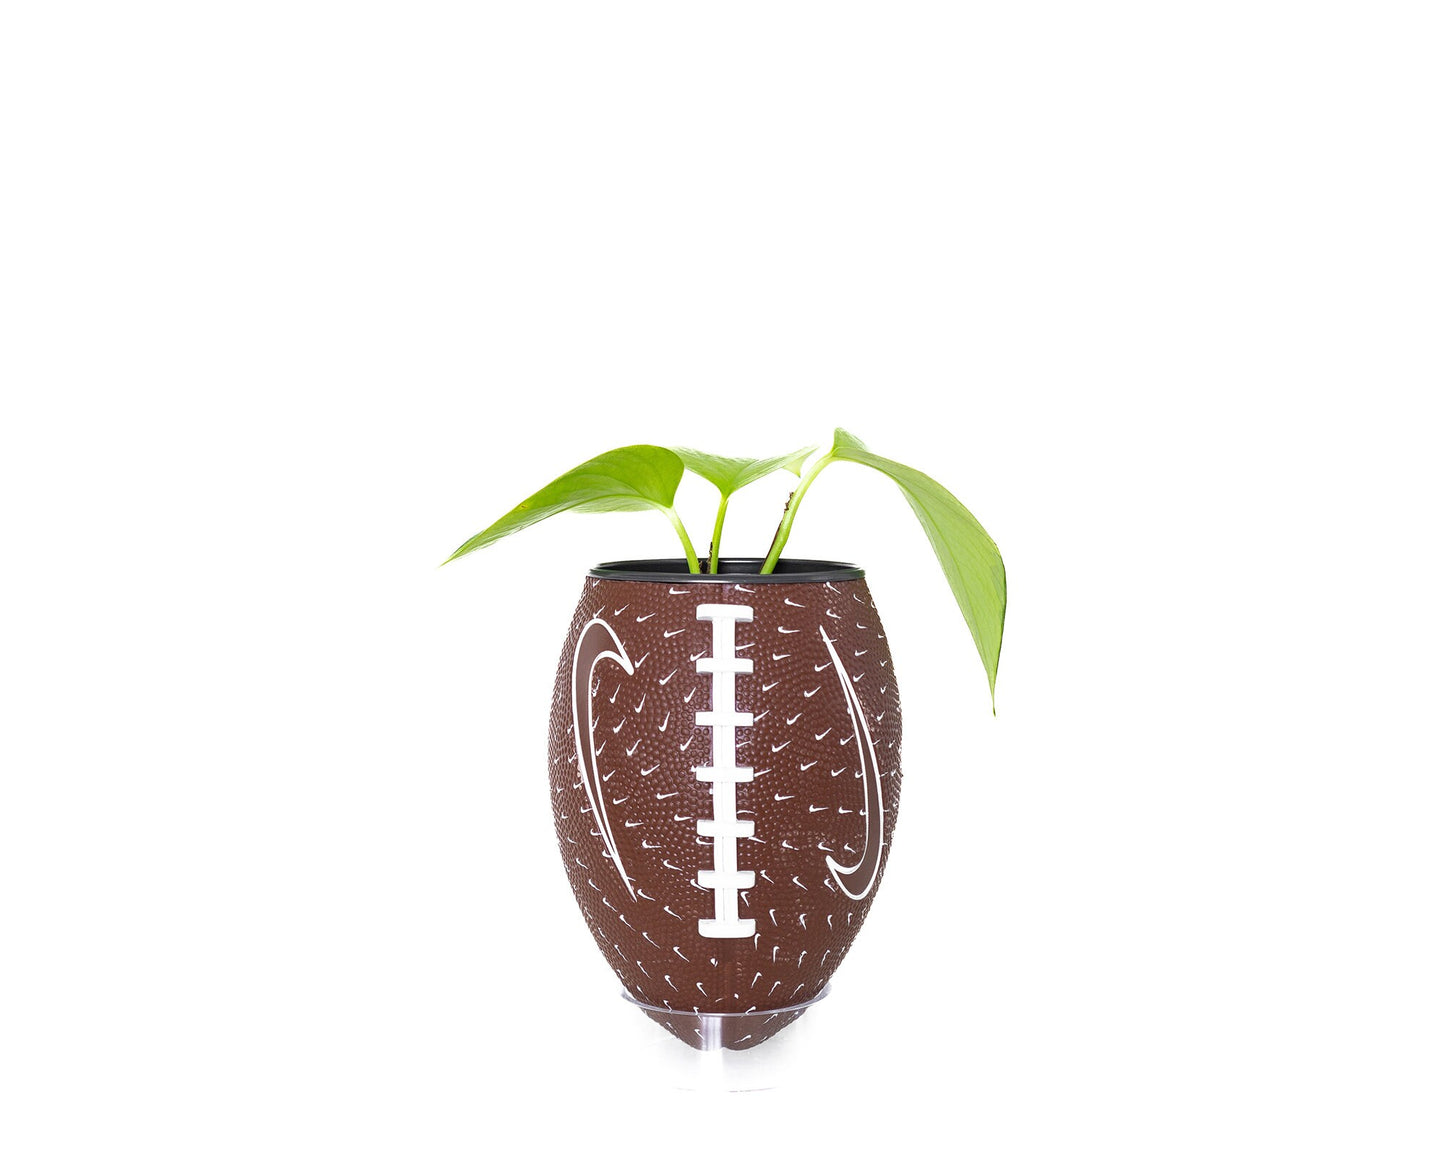 plntrs - Nike Swoosh Mini Football planter - with stand